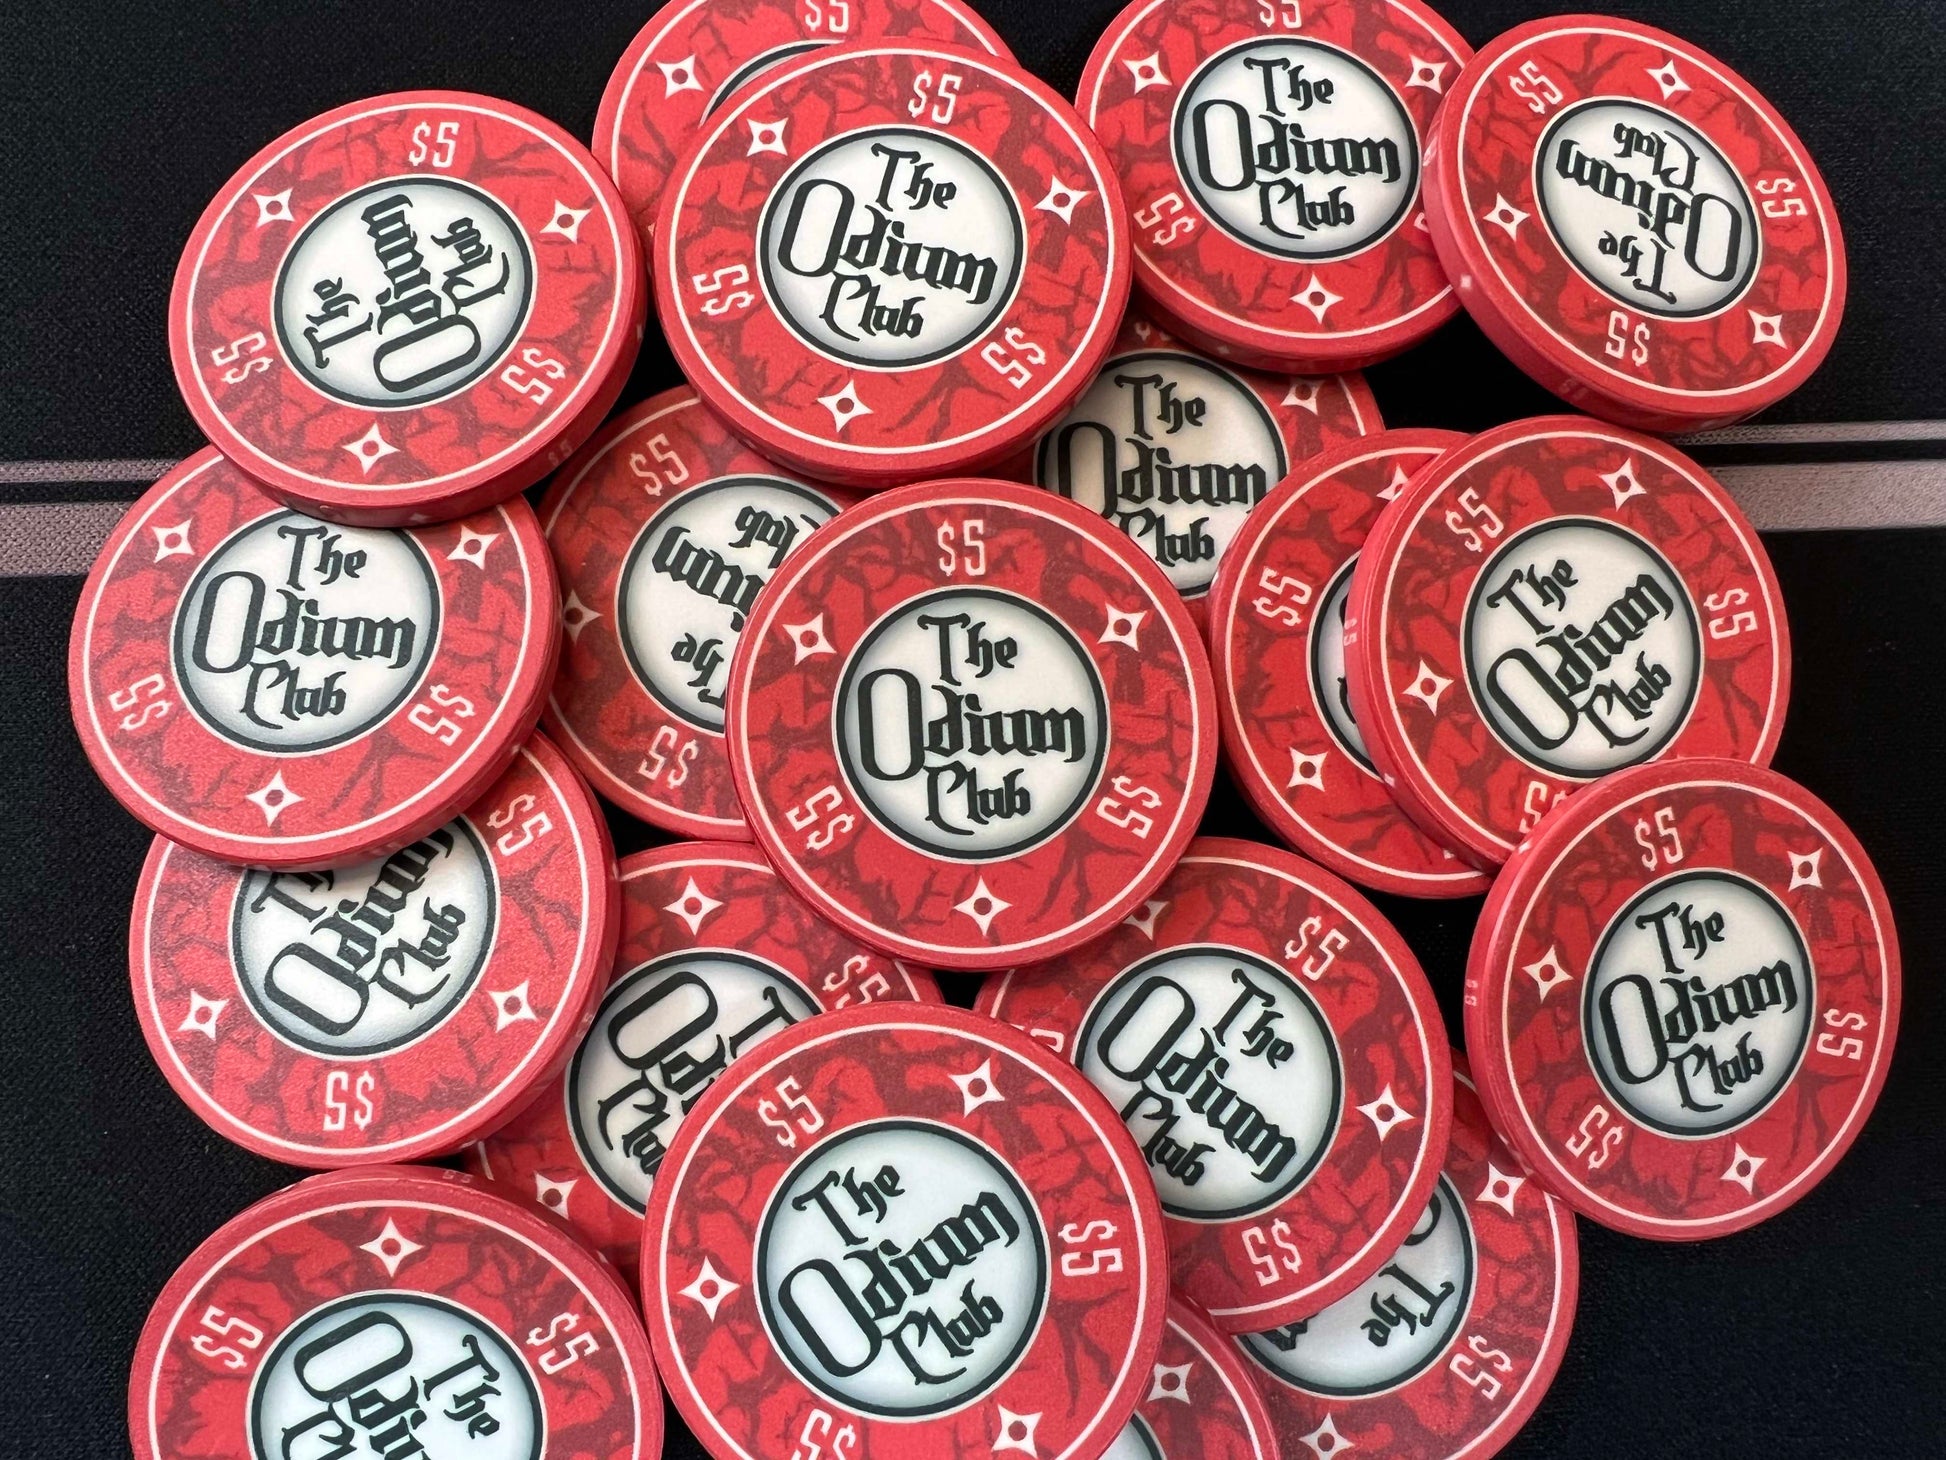 Shown here are the Odium Club 5 dollar red poker chips in a big pot. These are 39mm chips (actually closer to 40mm), which are standard casino size poker chips. They are the common poker chip thickness of 3.3mm or 0.13 inches. Whether you're a seasoned player who needs $5 chips for playing mid-stakes poker...or whether you need small denomination chips for casual poker play, these chips will get your hold'em poker game started off right.